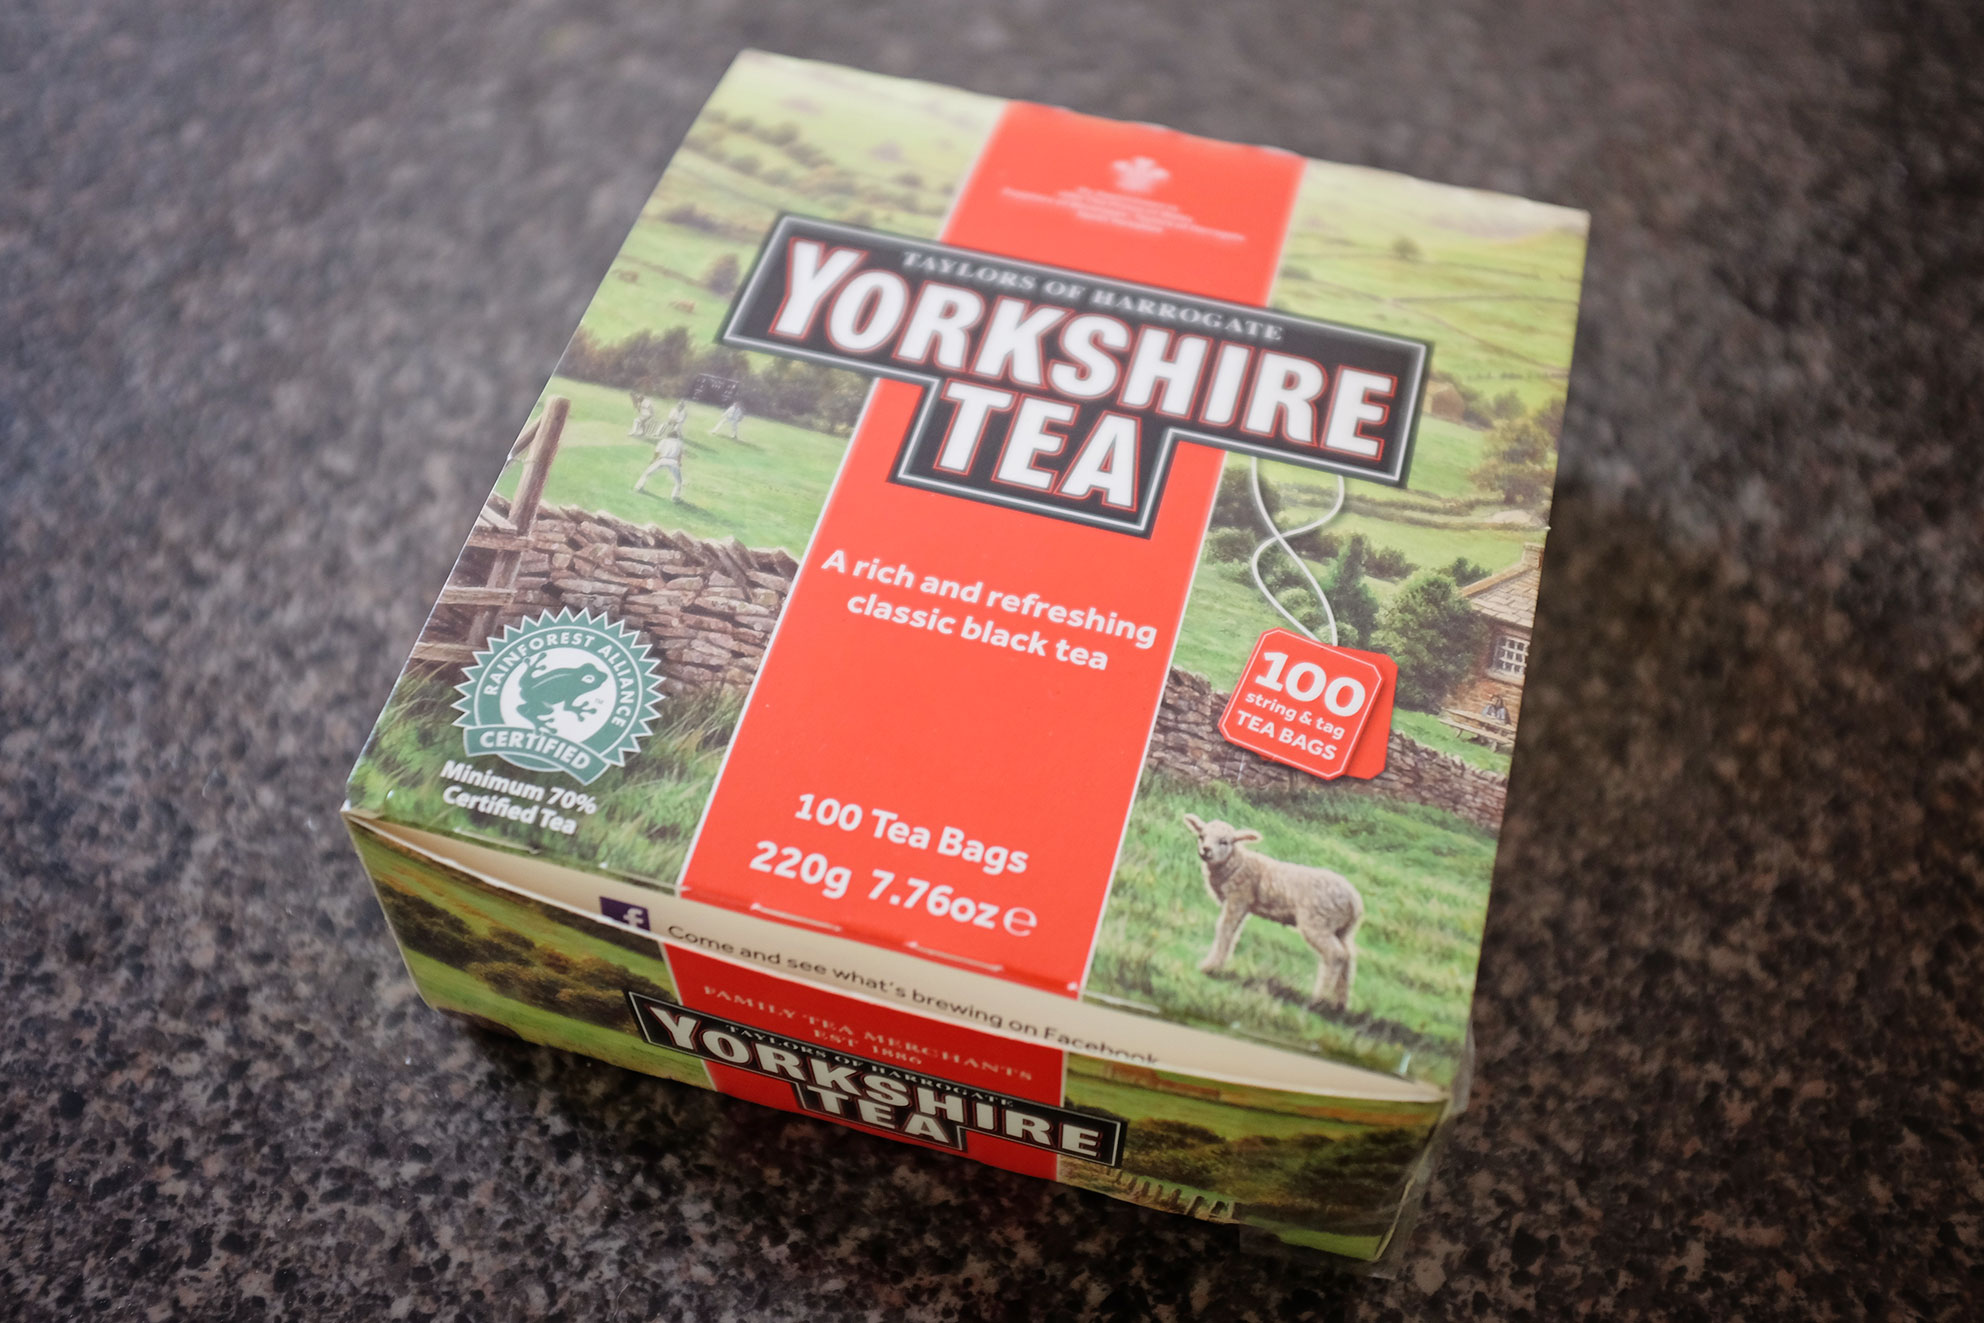 I just started drinking tea this year. I started with Yorkshire